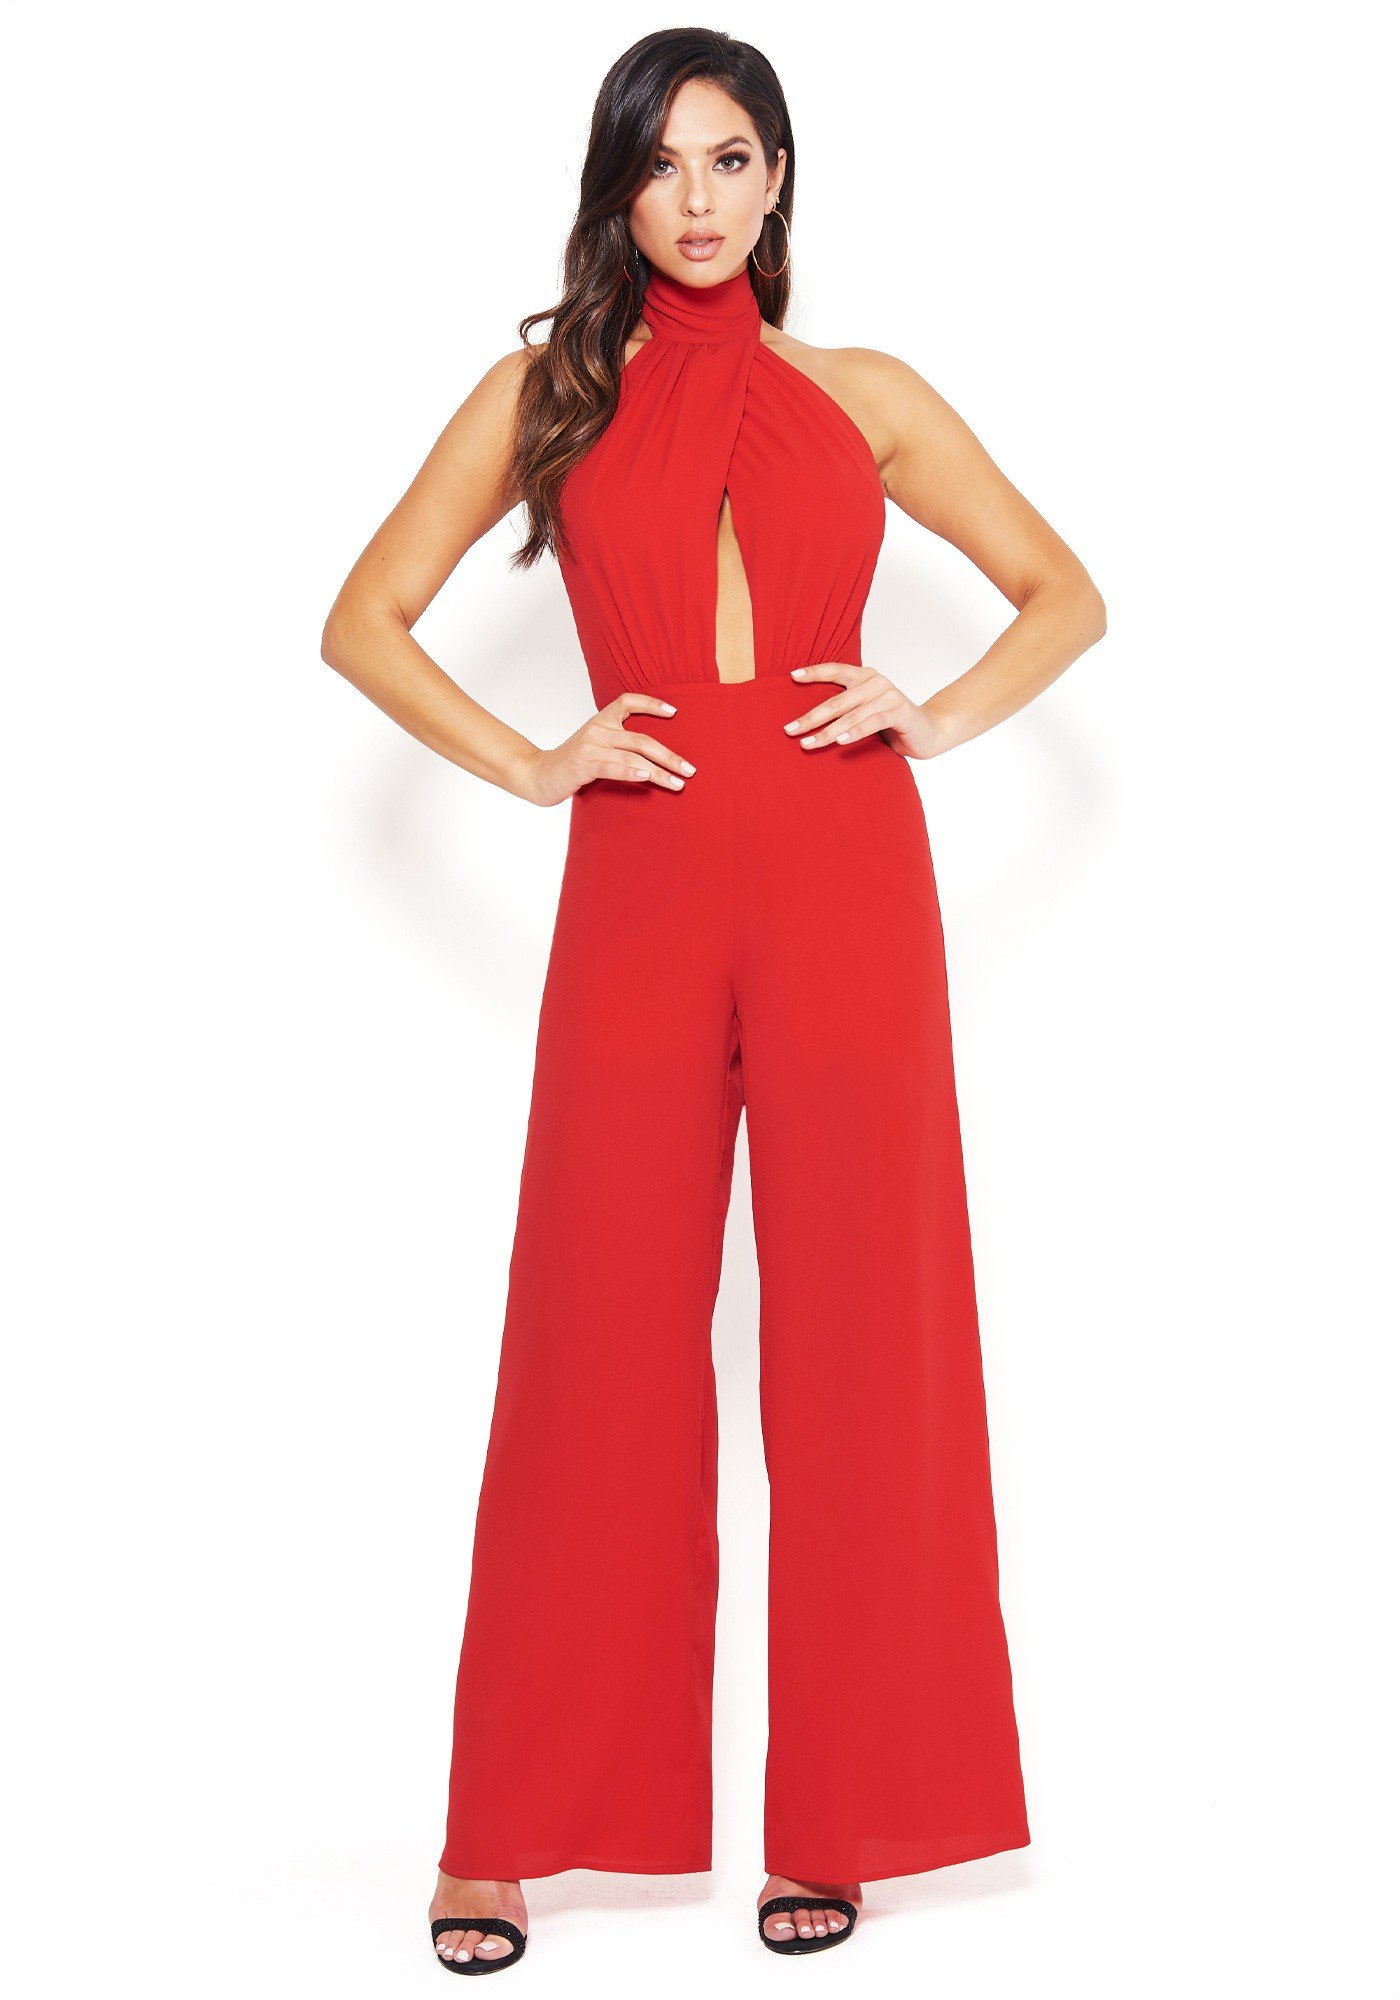 Bebe Women's Keyhole Halter Jumpsuit, Size 2 in Barbados Cherry Polyester